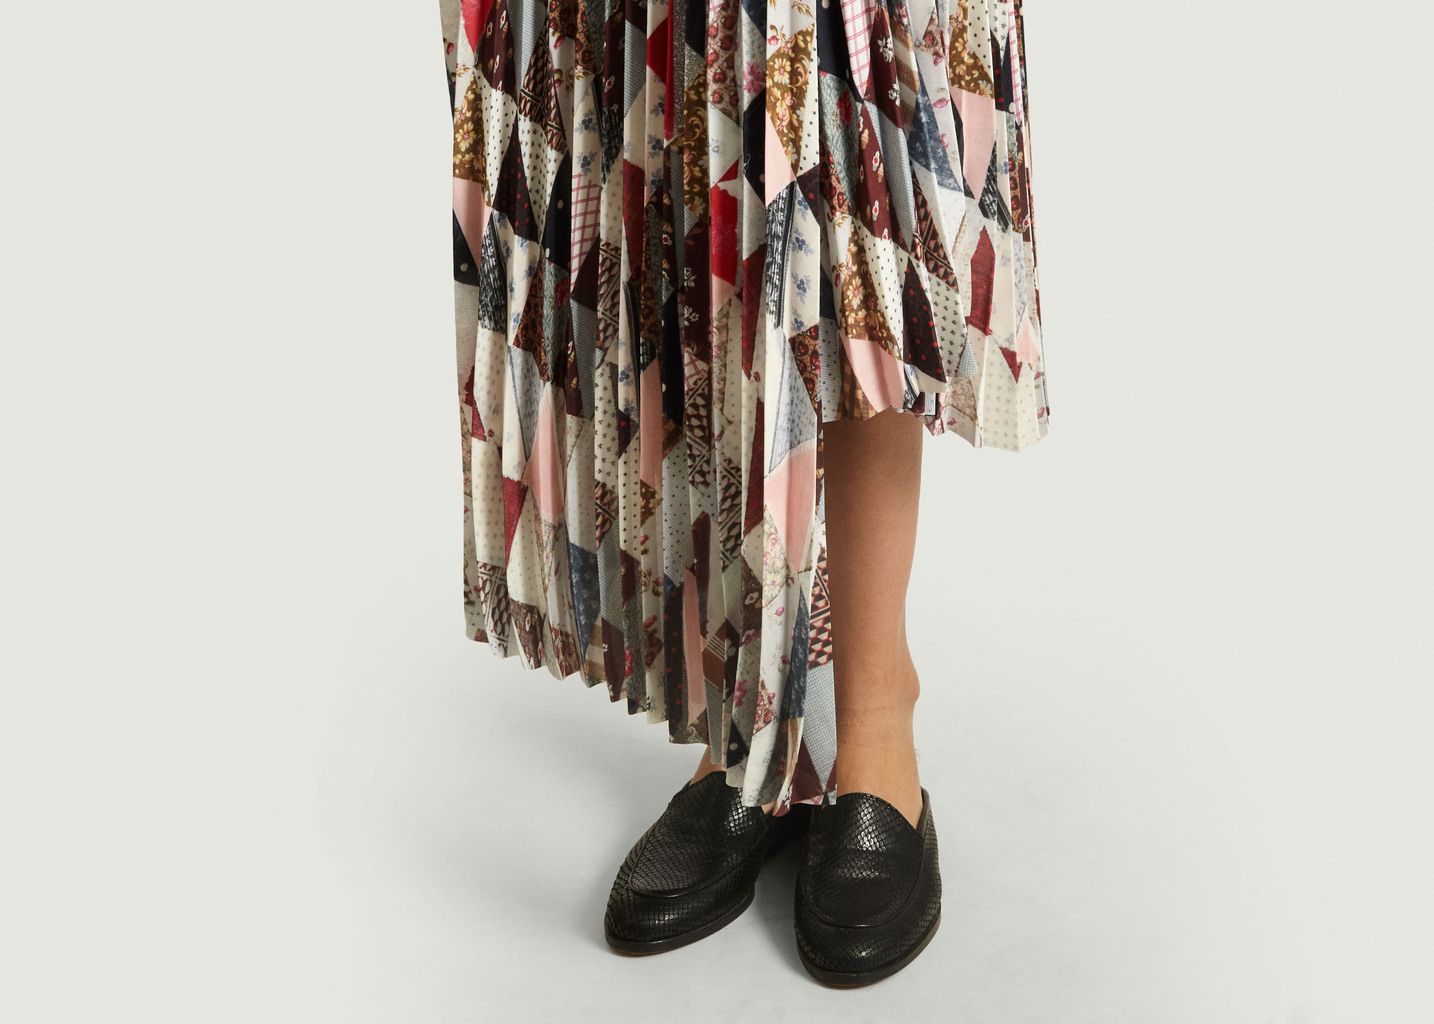 Piza patchwork print pleated skirt - By Malene Birger